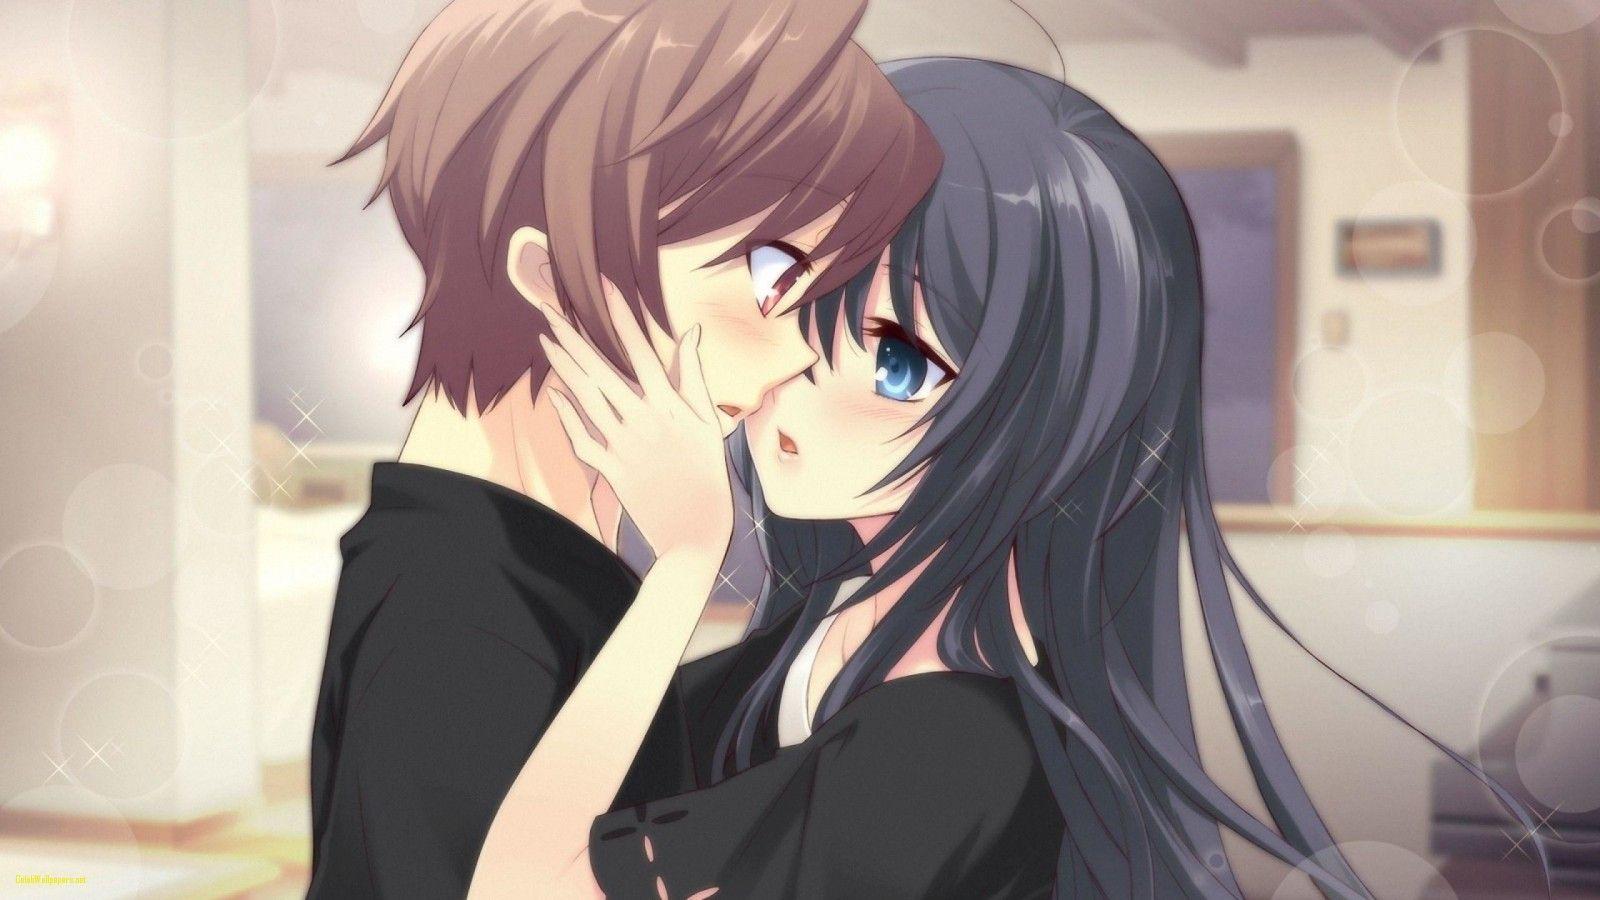 Cute Anime Picture Best Of Cute Anime Couple Wallpaper